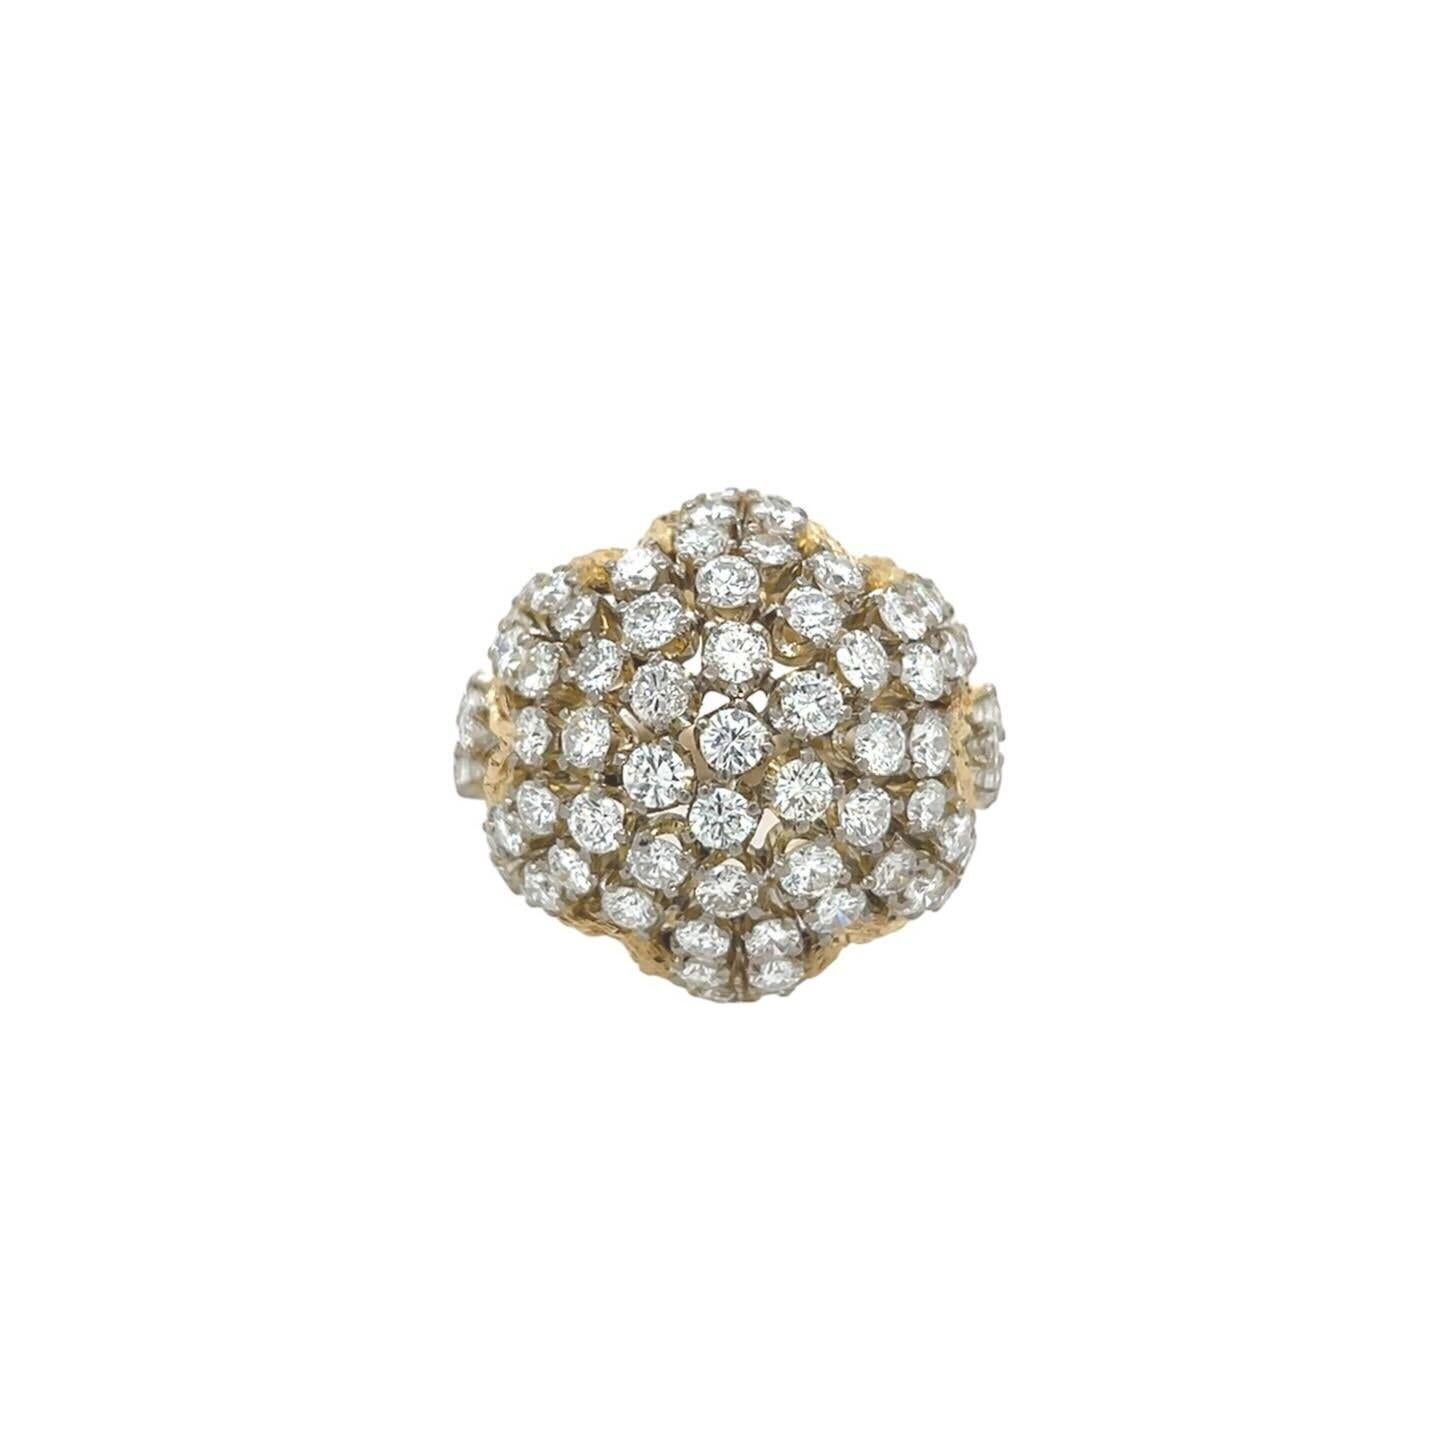 An 18 karat yellow gold and diamond ring, circa 1960s.  The bombe ring designed as dome of approximately seventy two (72) round brilliant cut diamonds above a textured zigzag border with a similarly textured band.  Total diamond weight approximately